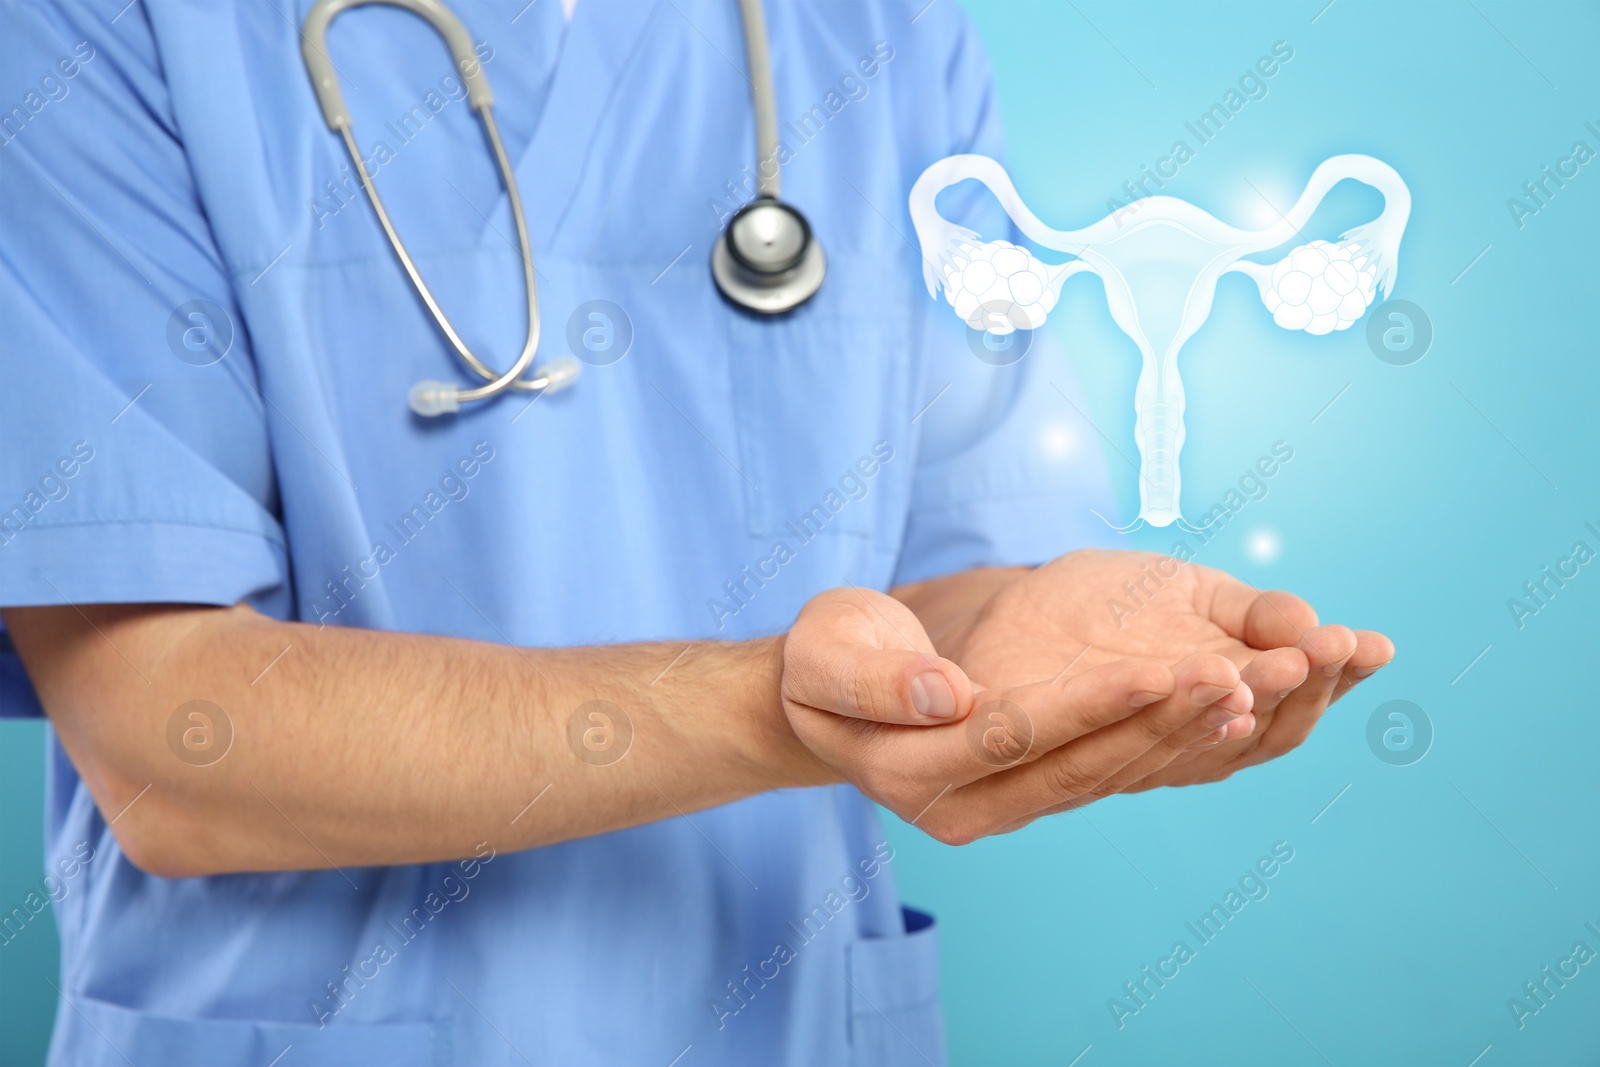 Image of Doctor and illustration of female reproductive system on light blue background, closeup